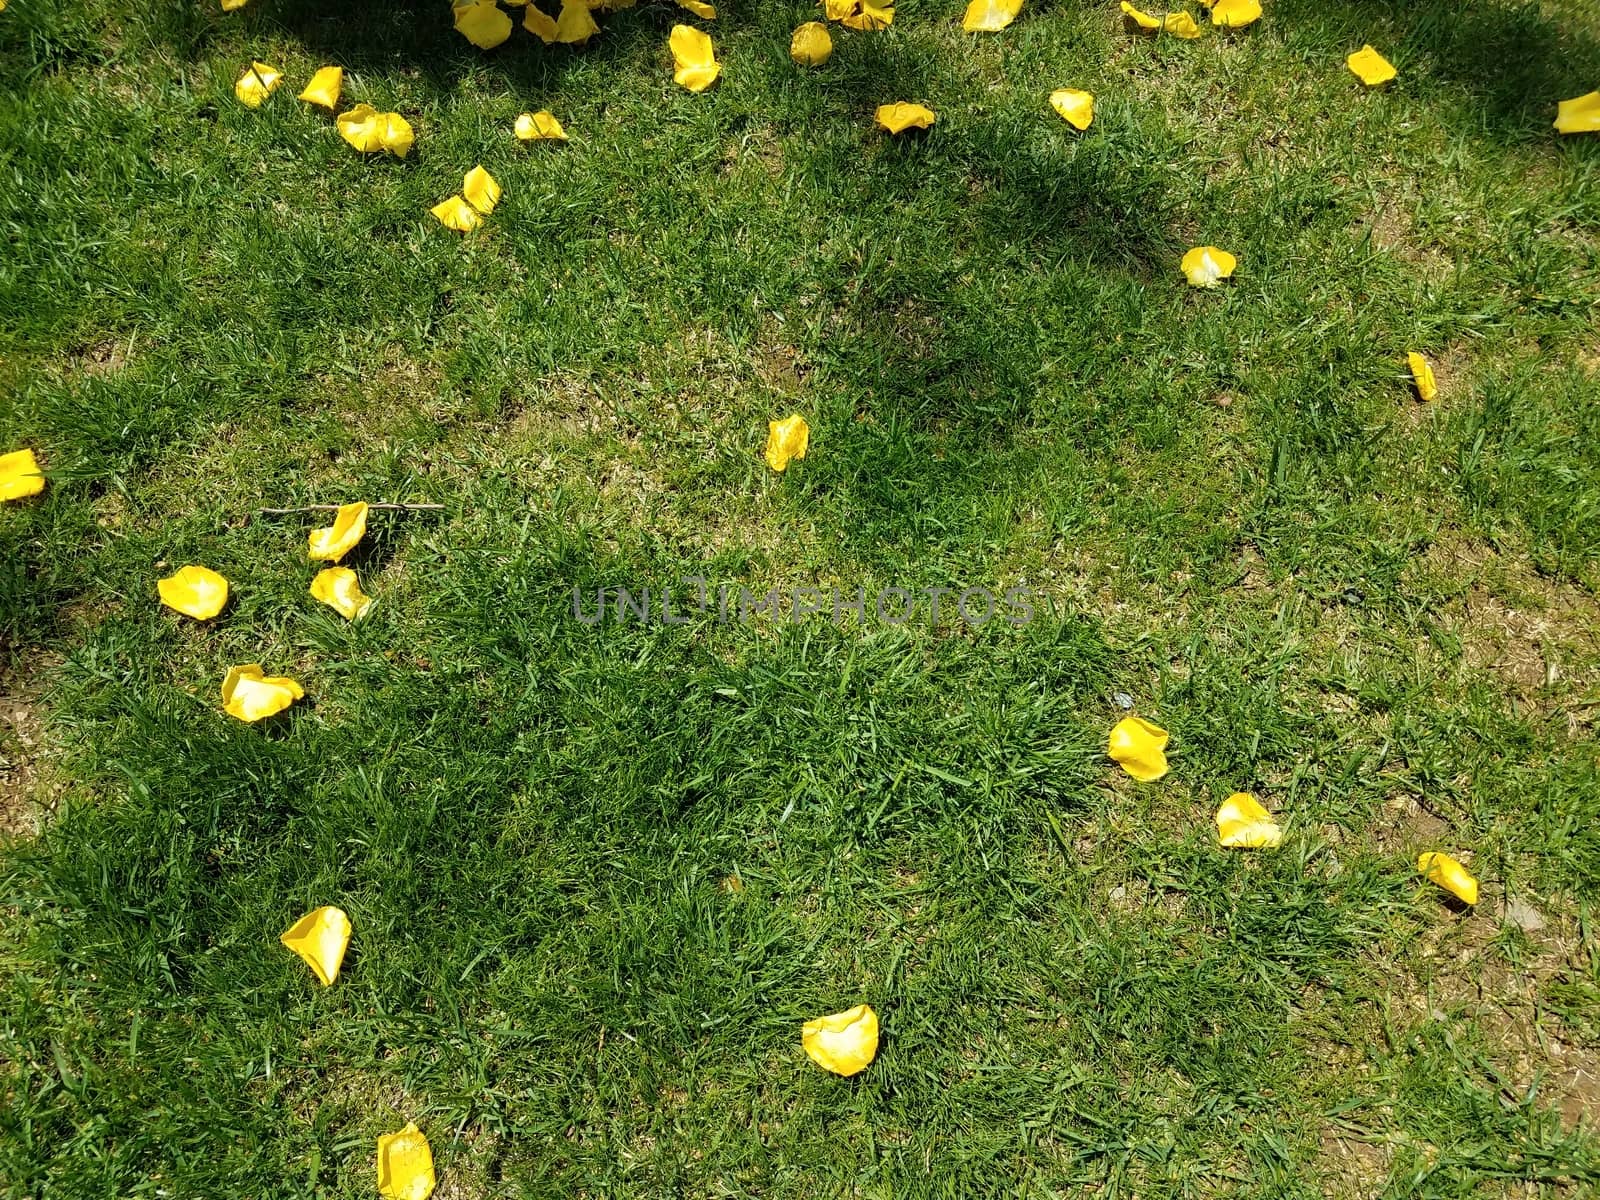 yellow flower petals on green grass lawn or yard by stockphotofan1